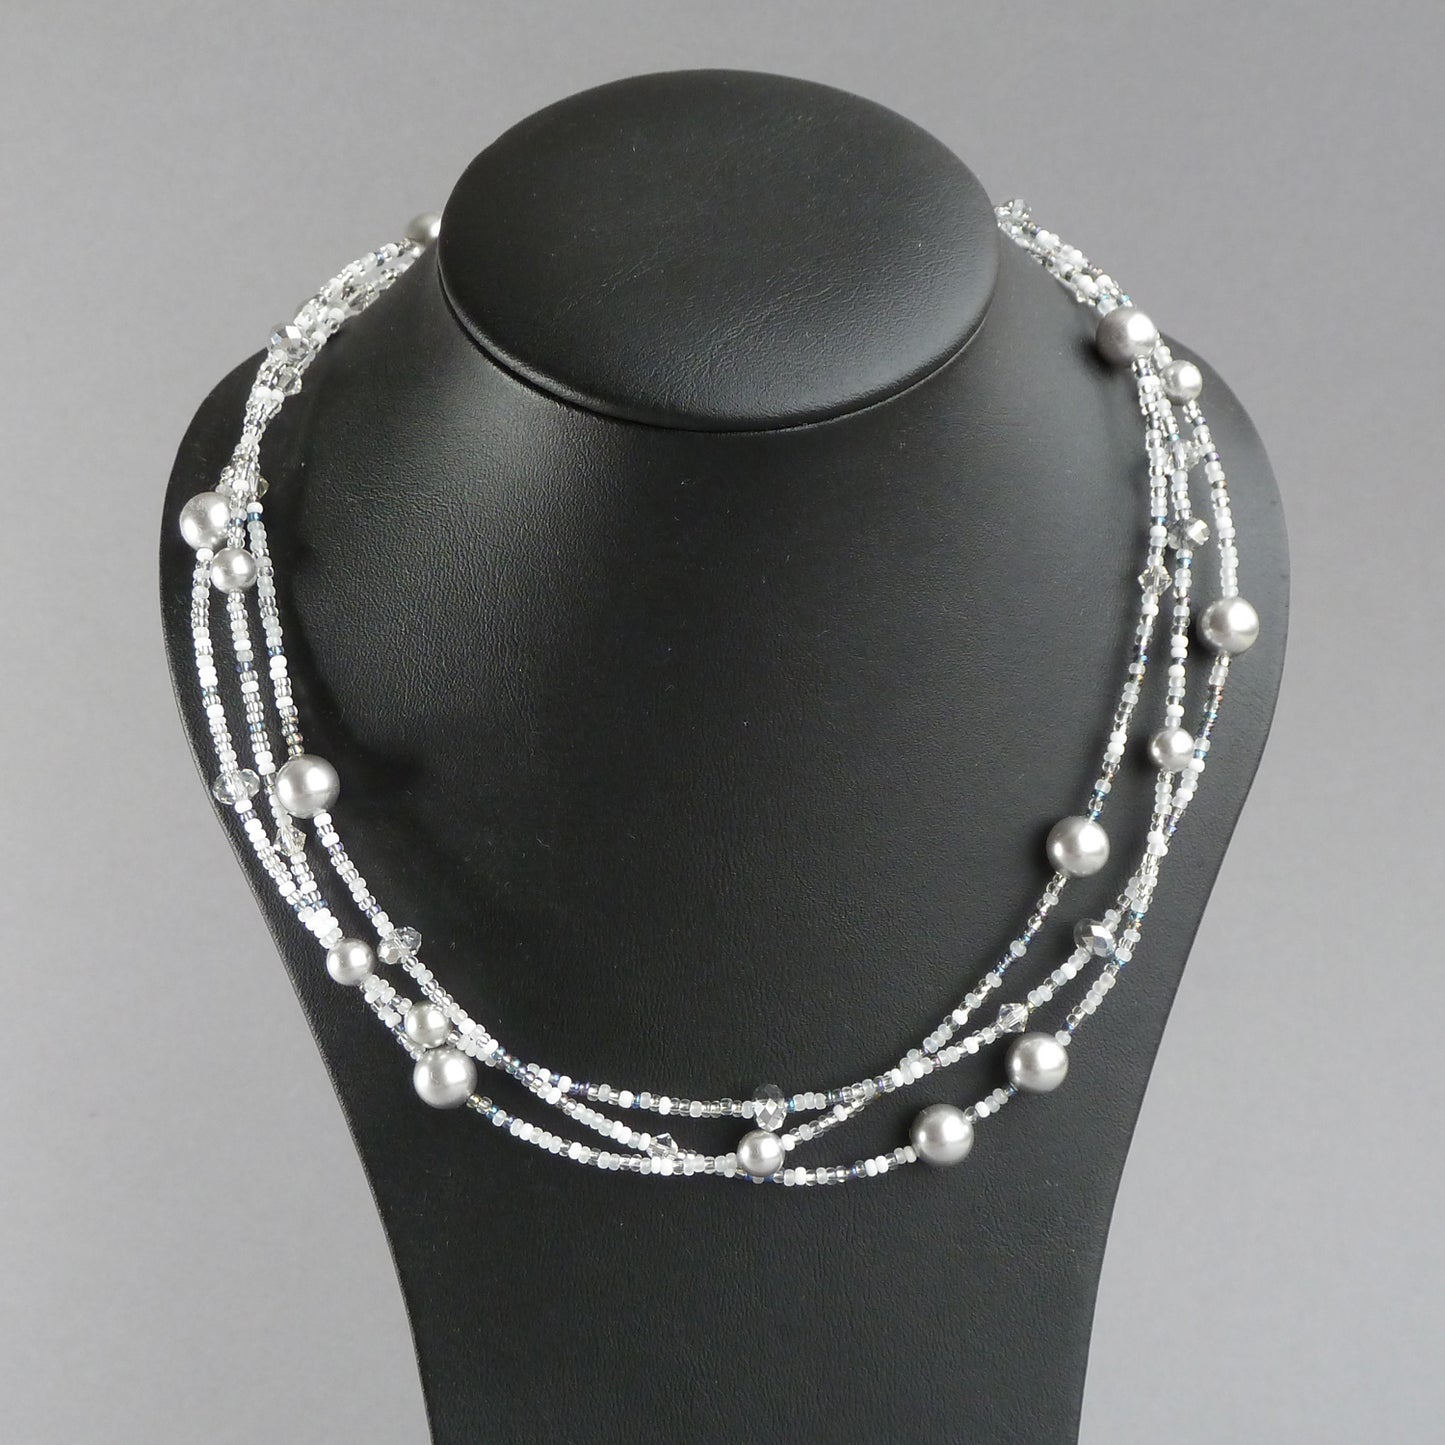 Light grey twisted necklace